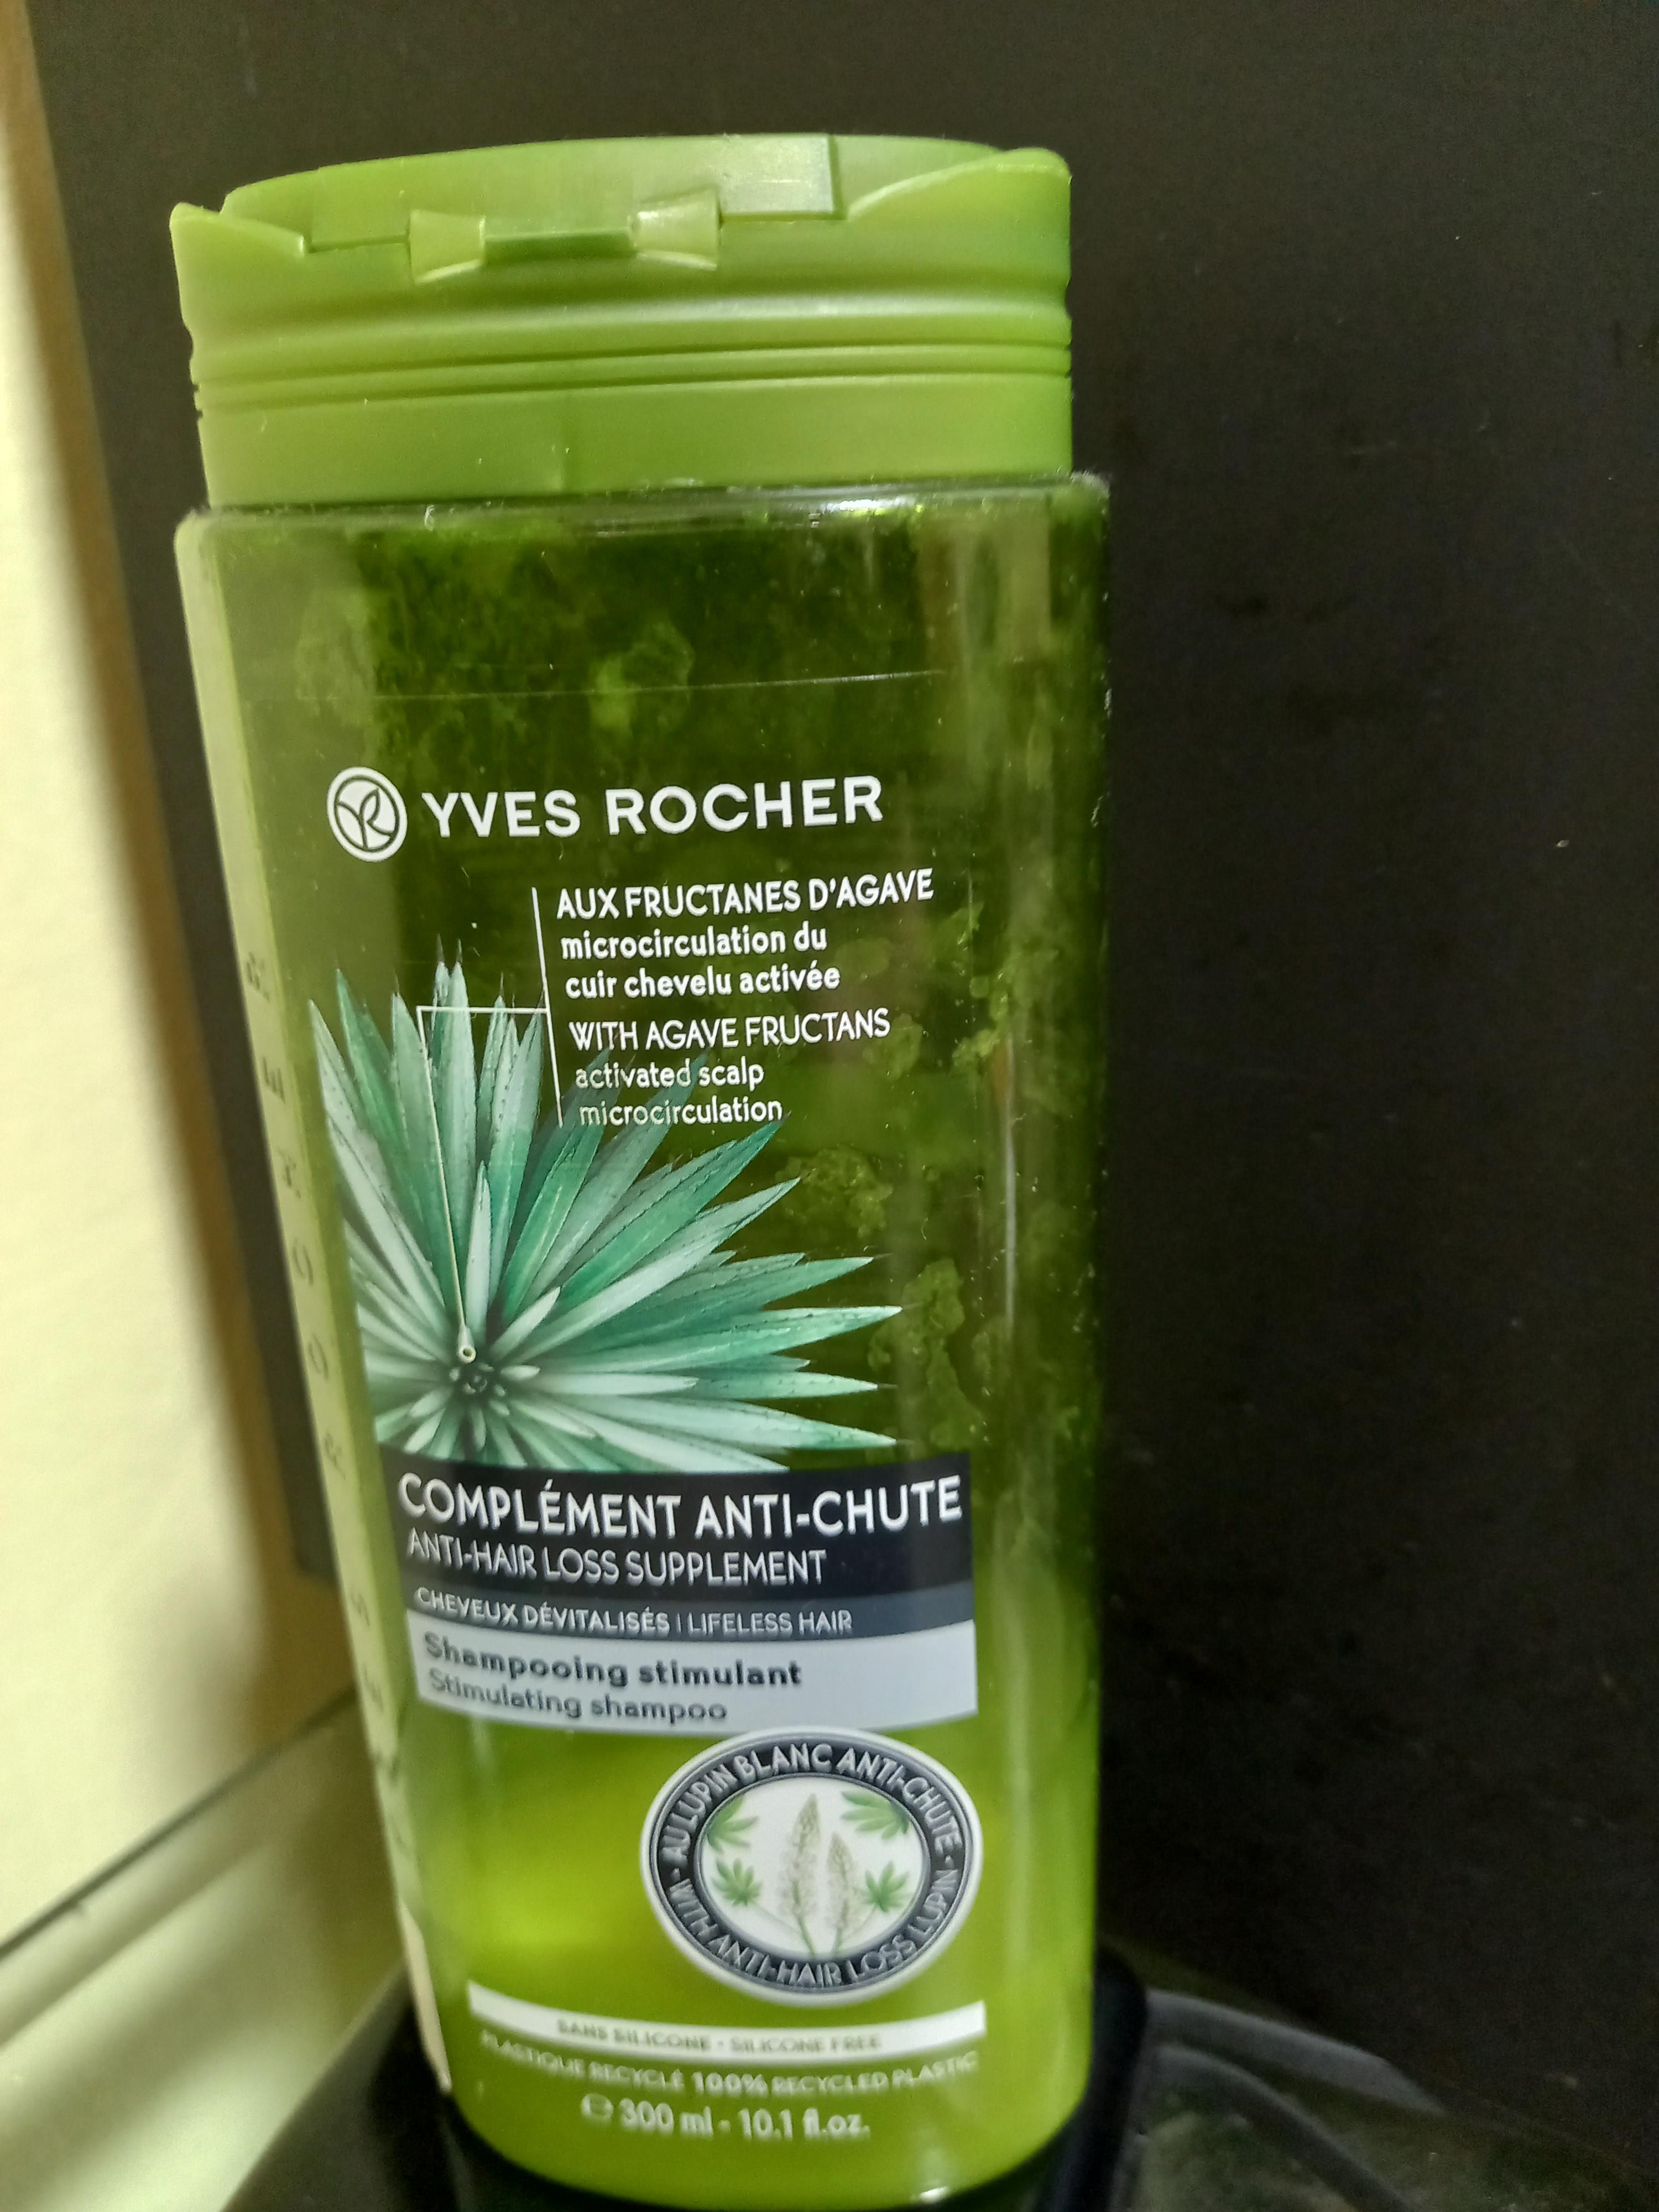 Anti-hair loss supplement stimulating shampoo by Yves rocher : review -  Shampoo & conditioner